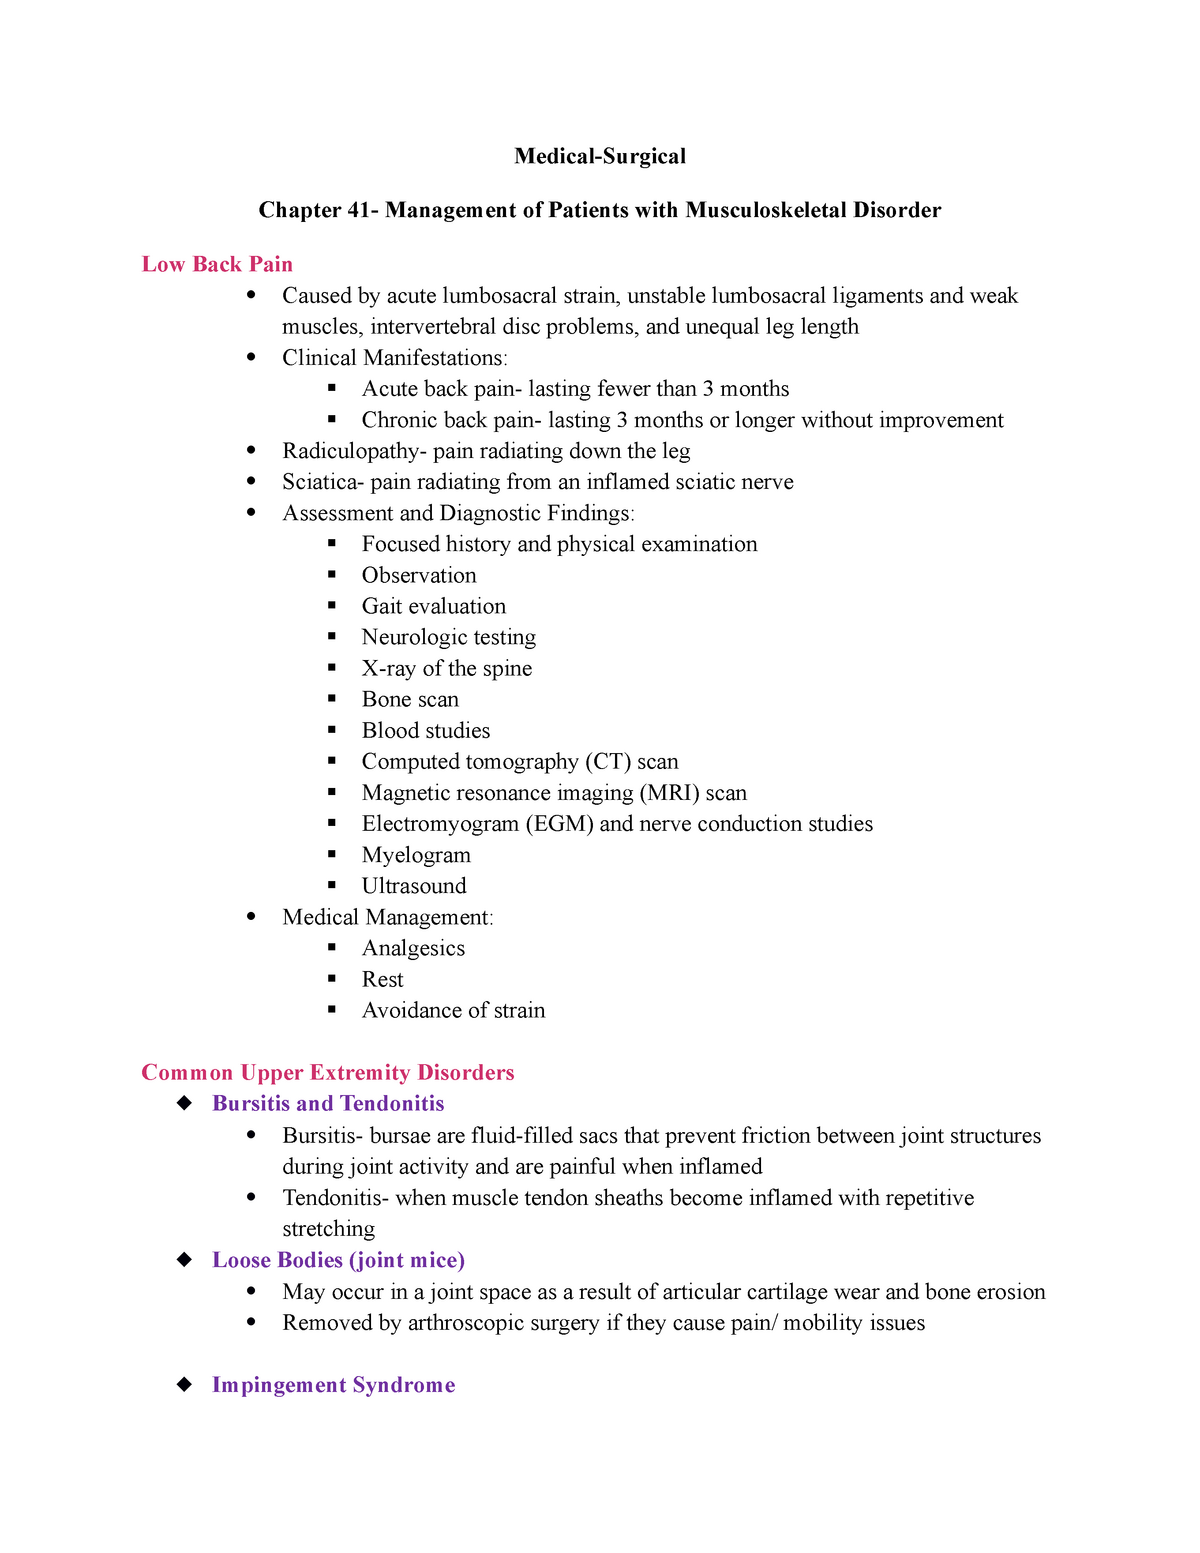 Med Surg Chapter 41 Med Surg Notes Medical Surgical Chapter 41 Management Of Patients With 6388